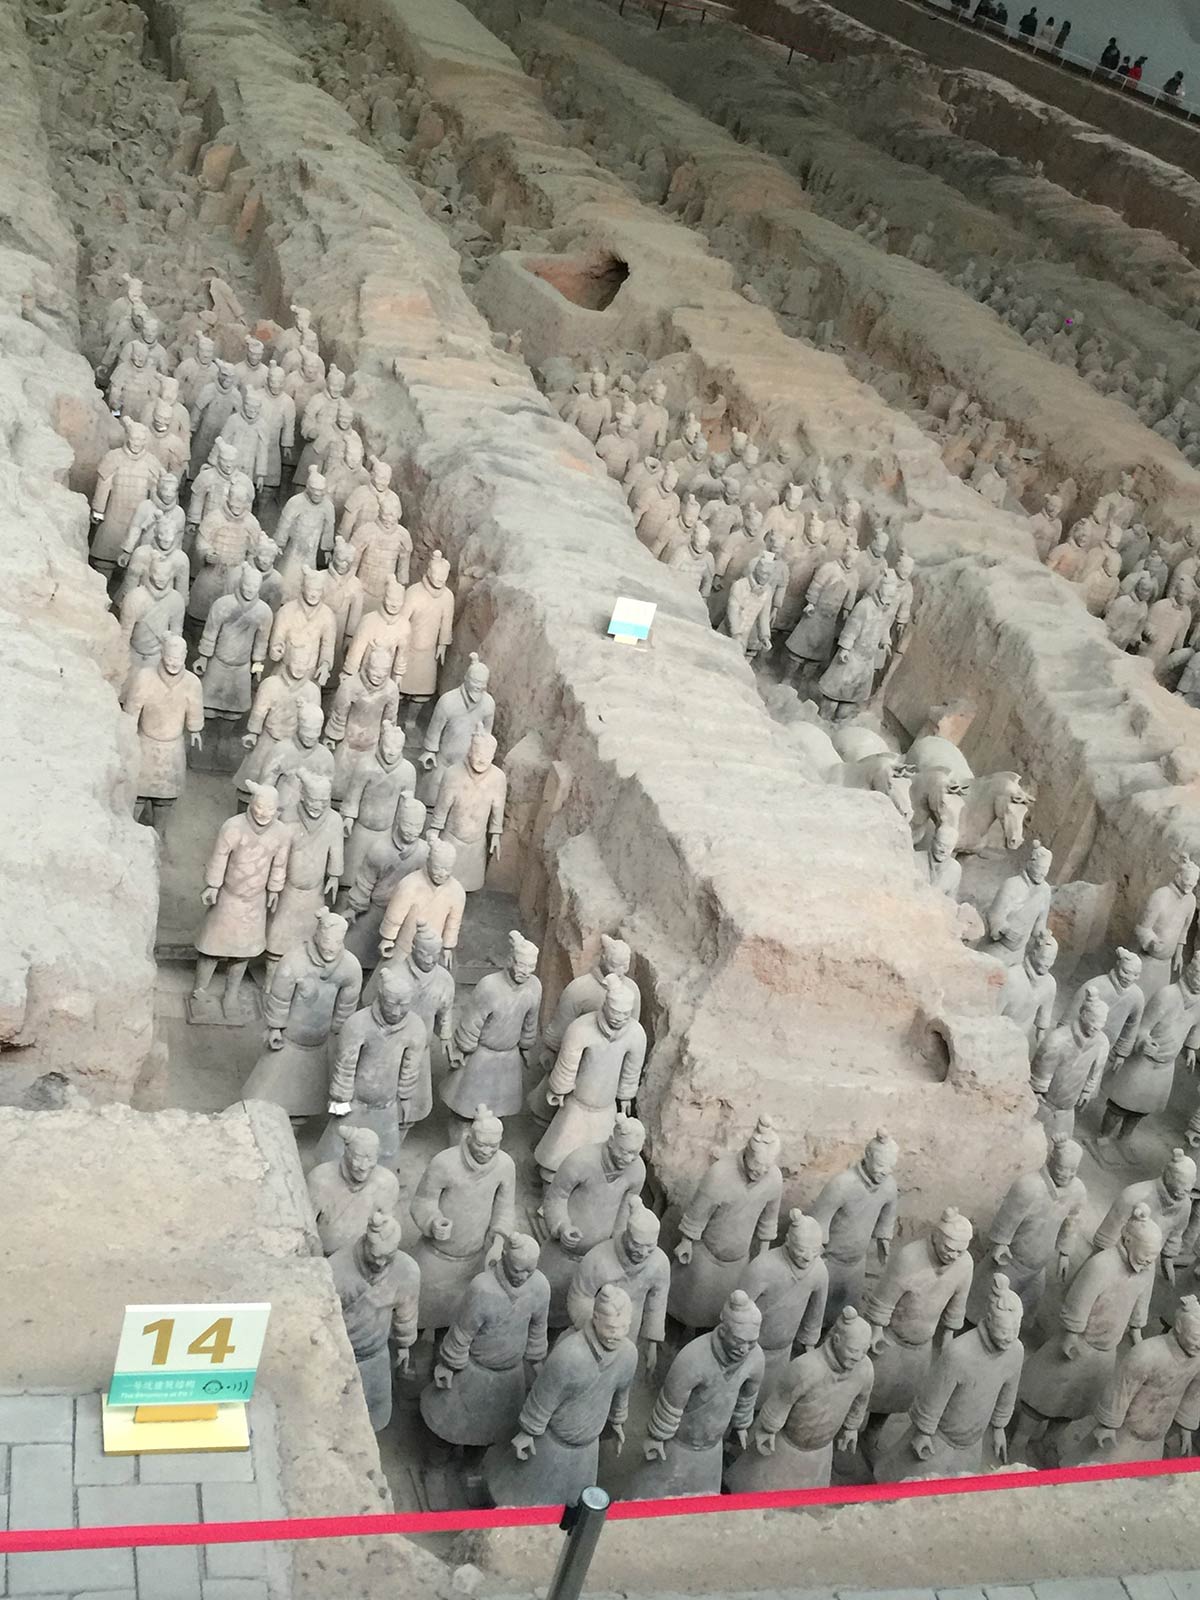 Part of the army of terracotta soldiers in Xi'an, China. The terracotta warriors